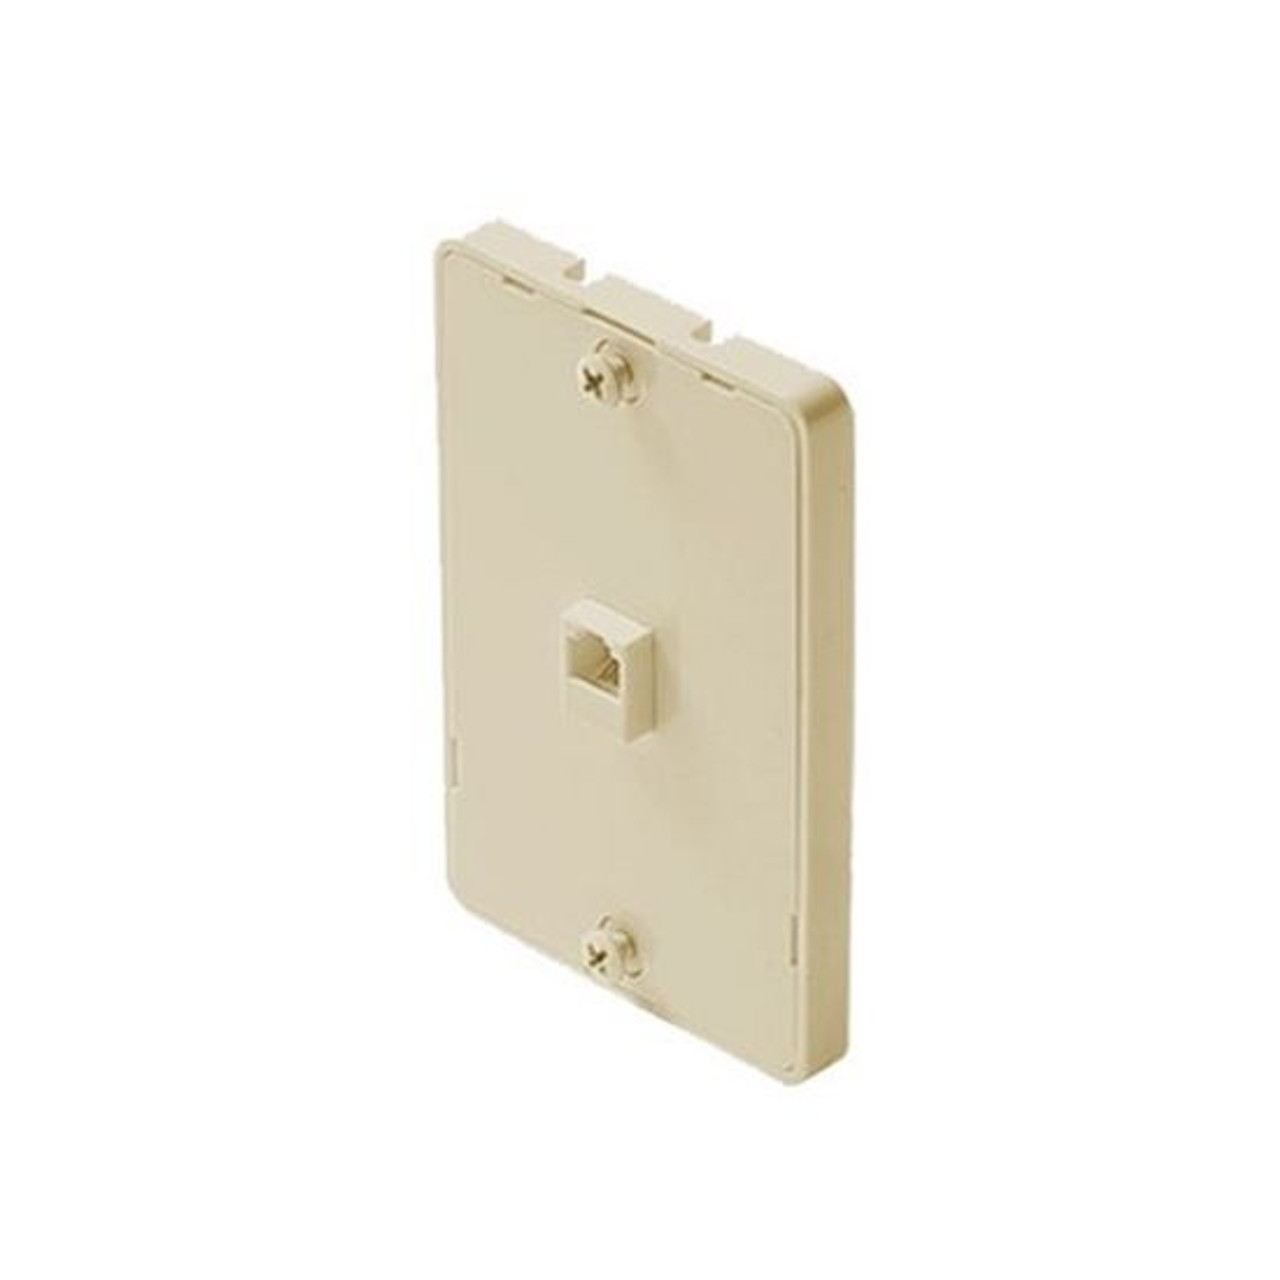 Cooper Telephone Jack Wall Mounting Plate 630 3521-4V